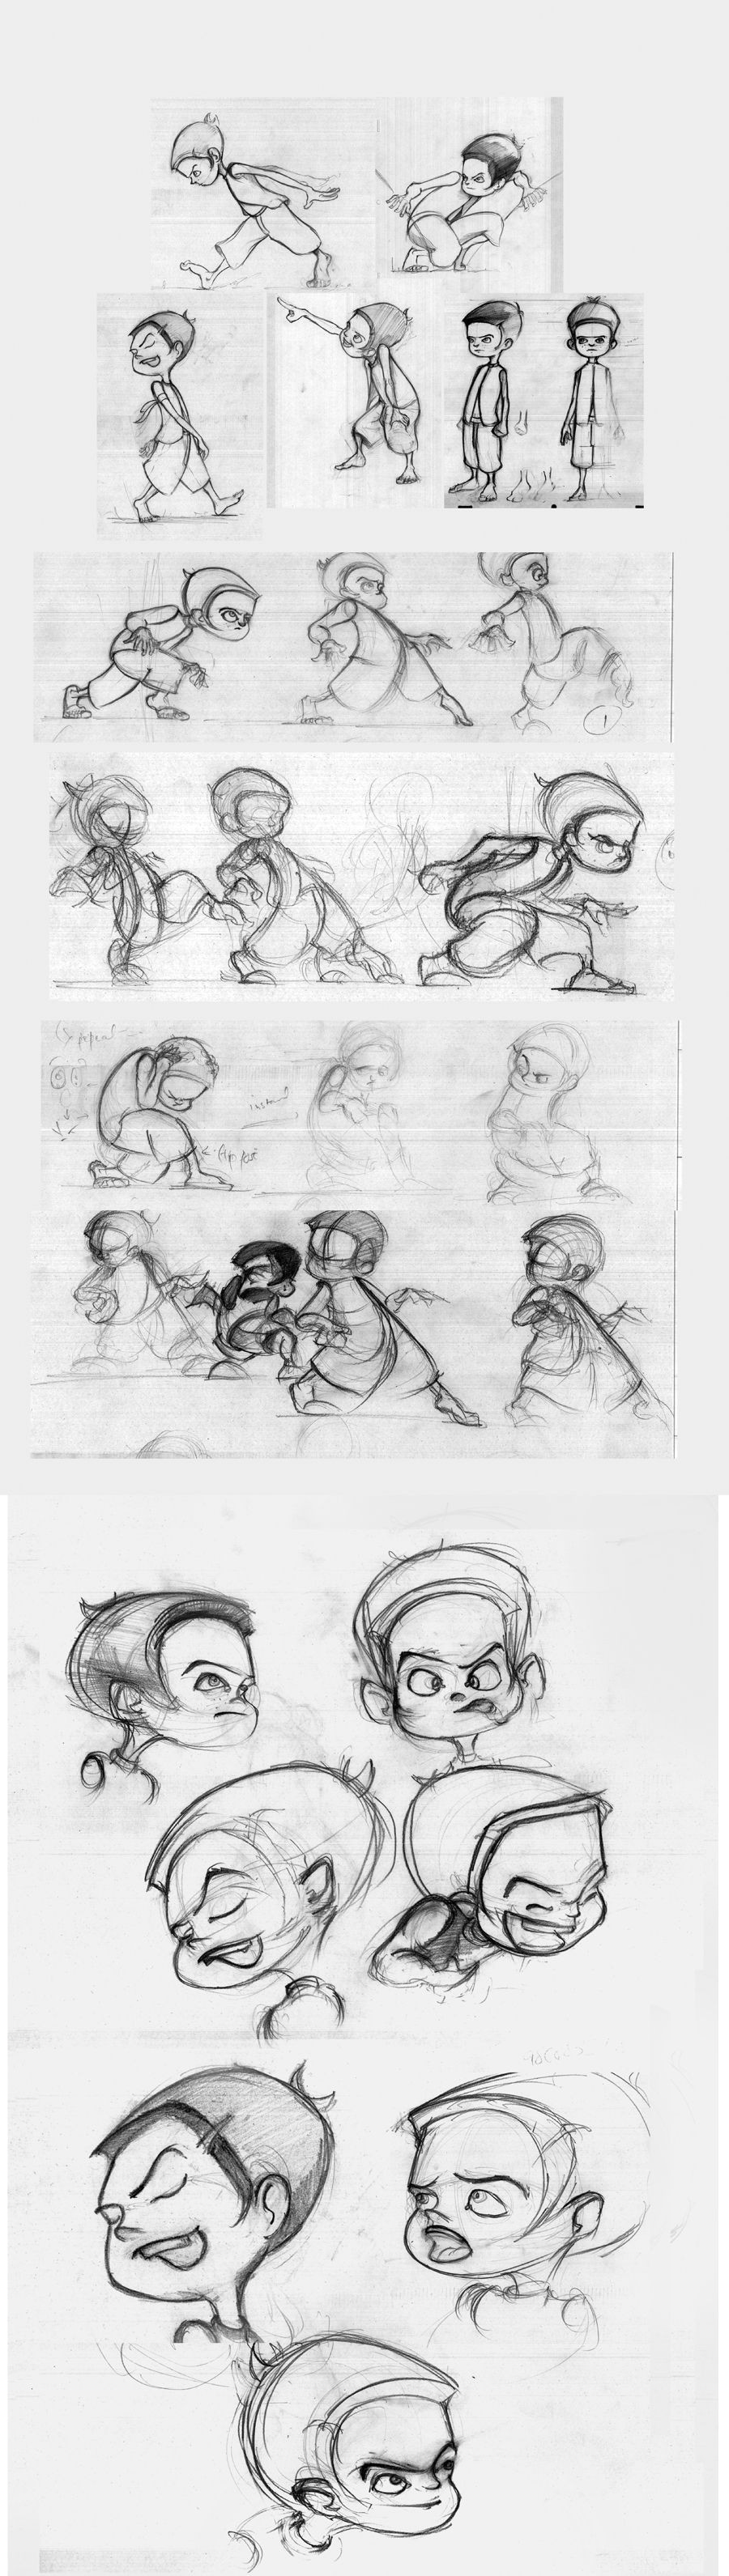 gestures and expressions for village boy bhoot gaun 2d animated short